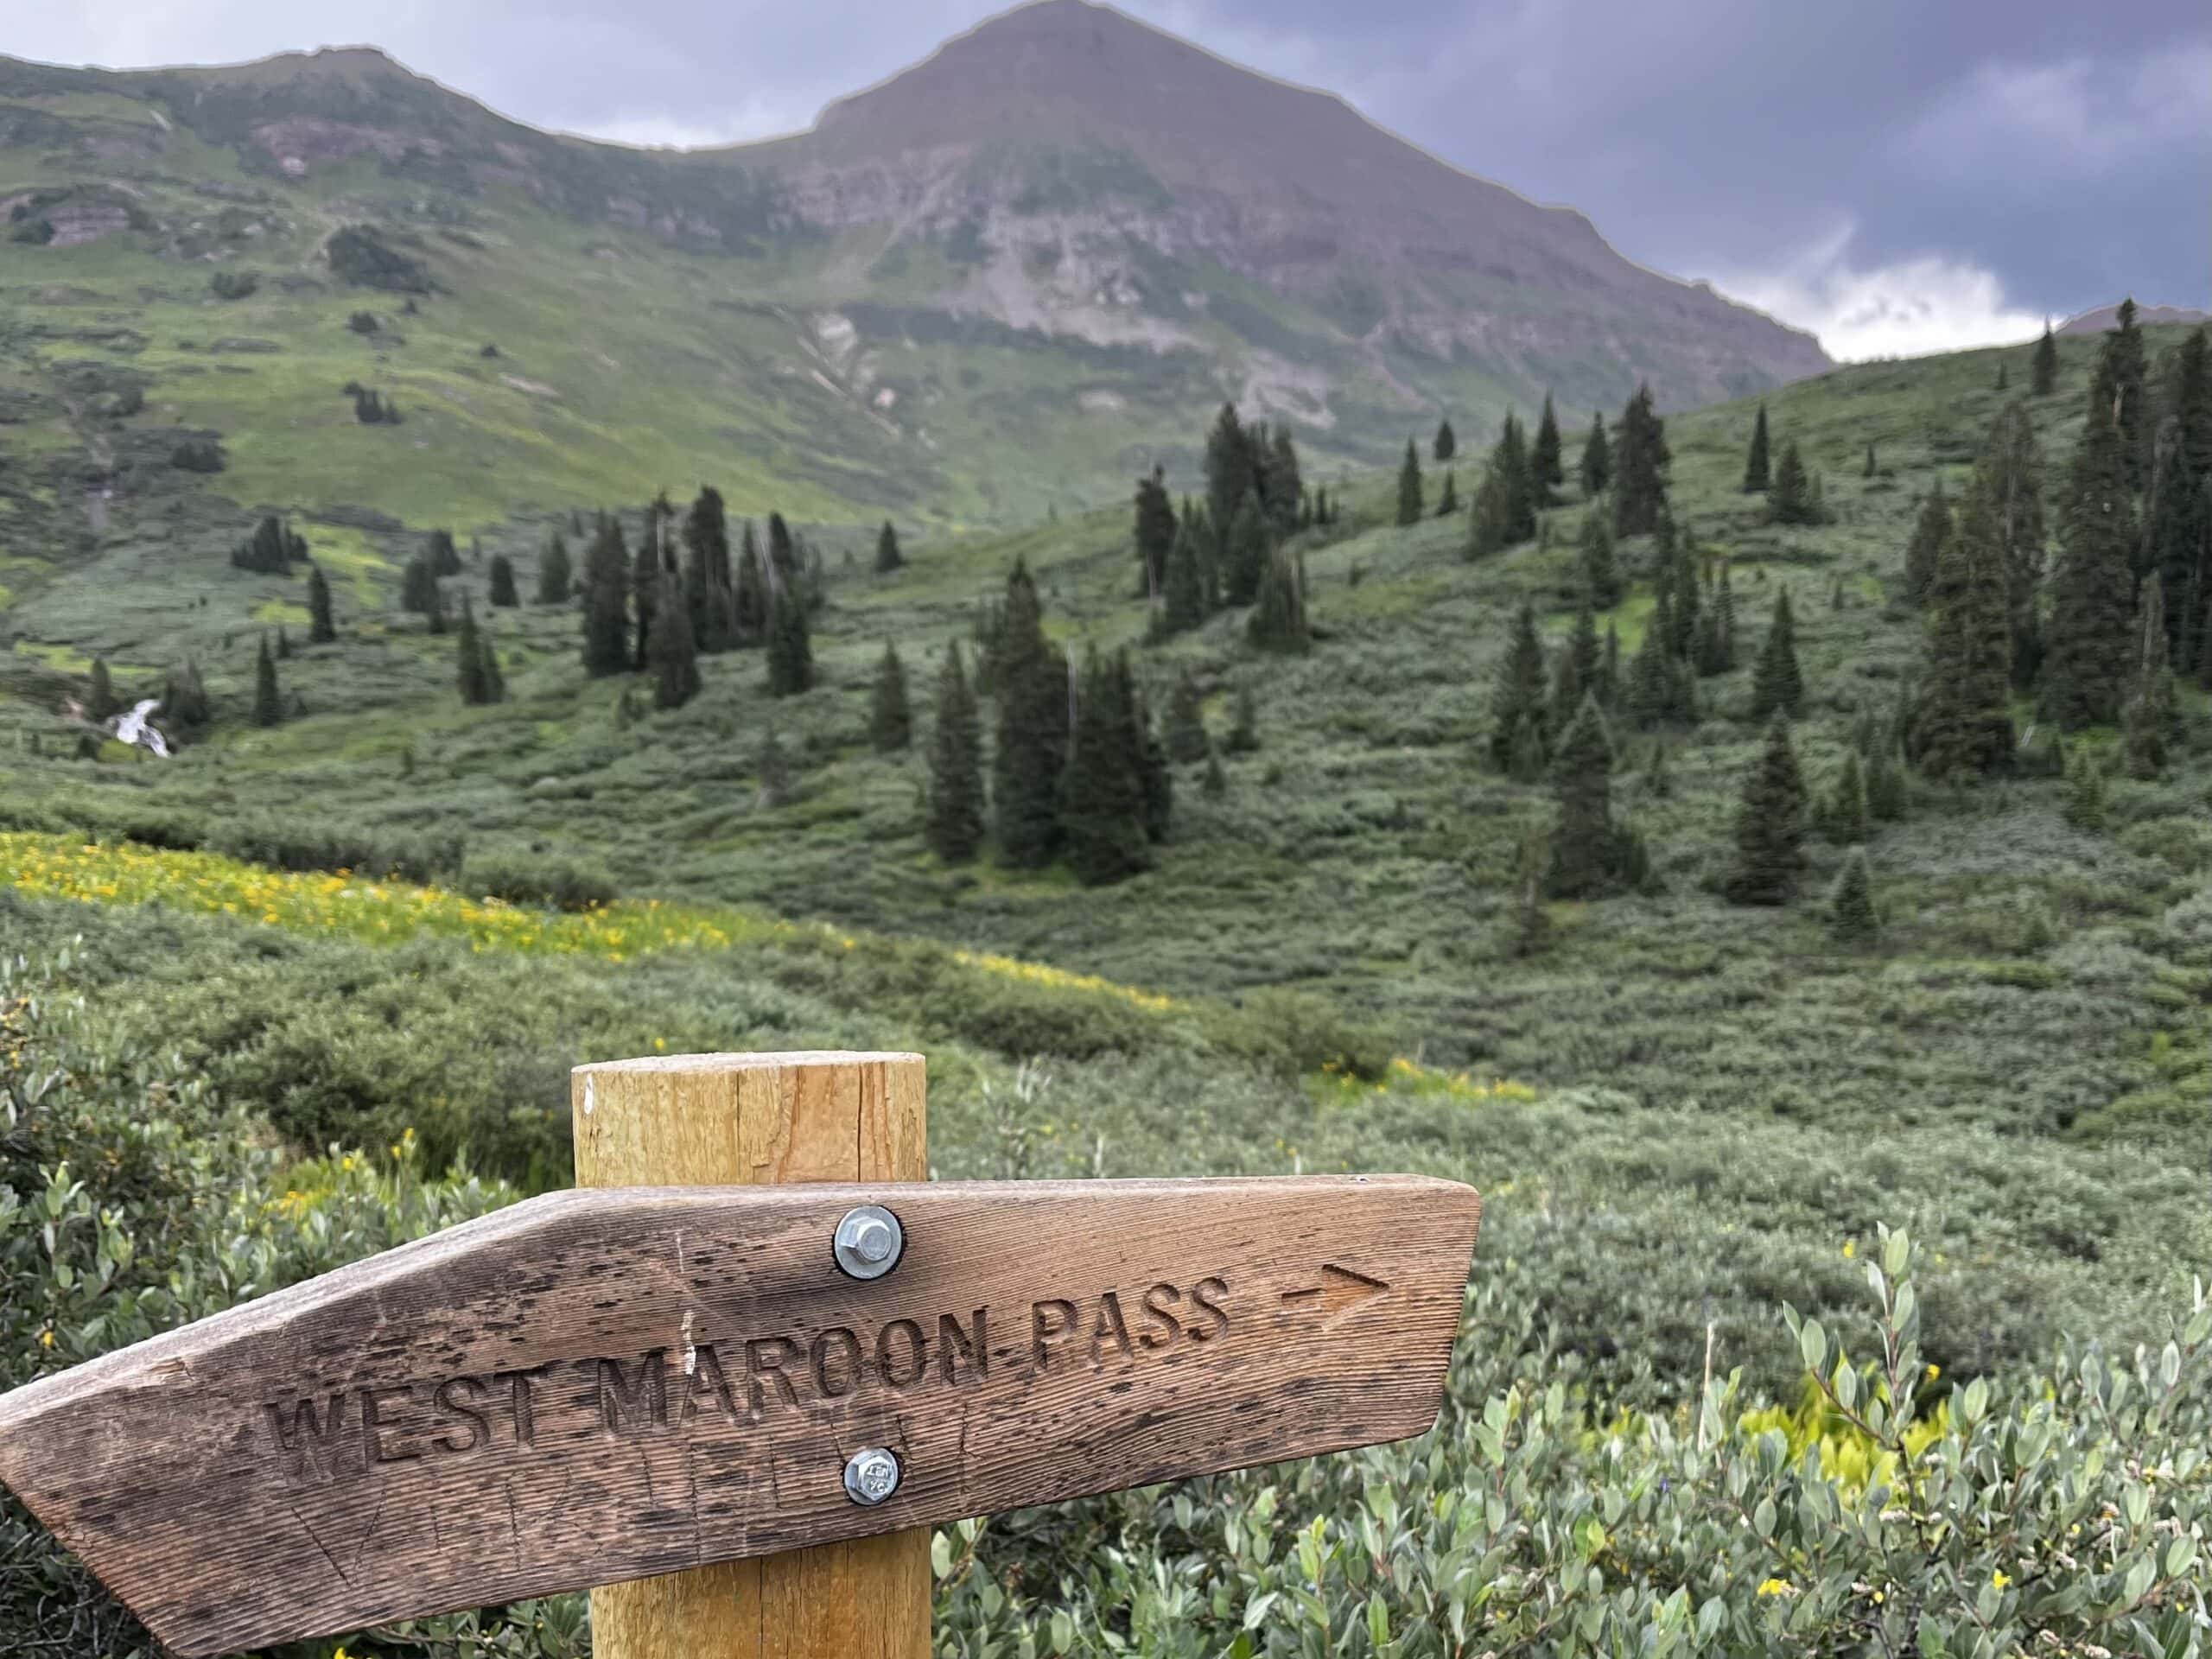 A sign marking the West Maroon Pass